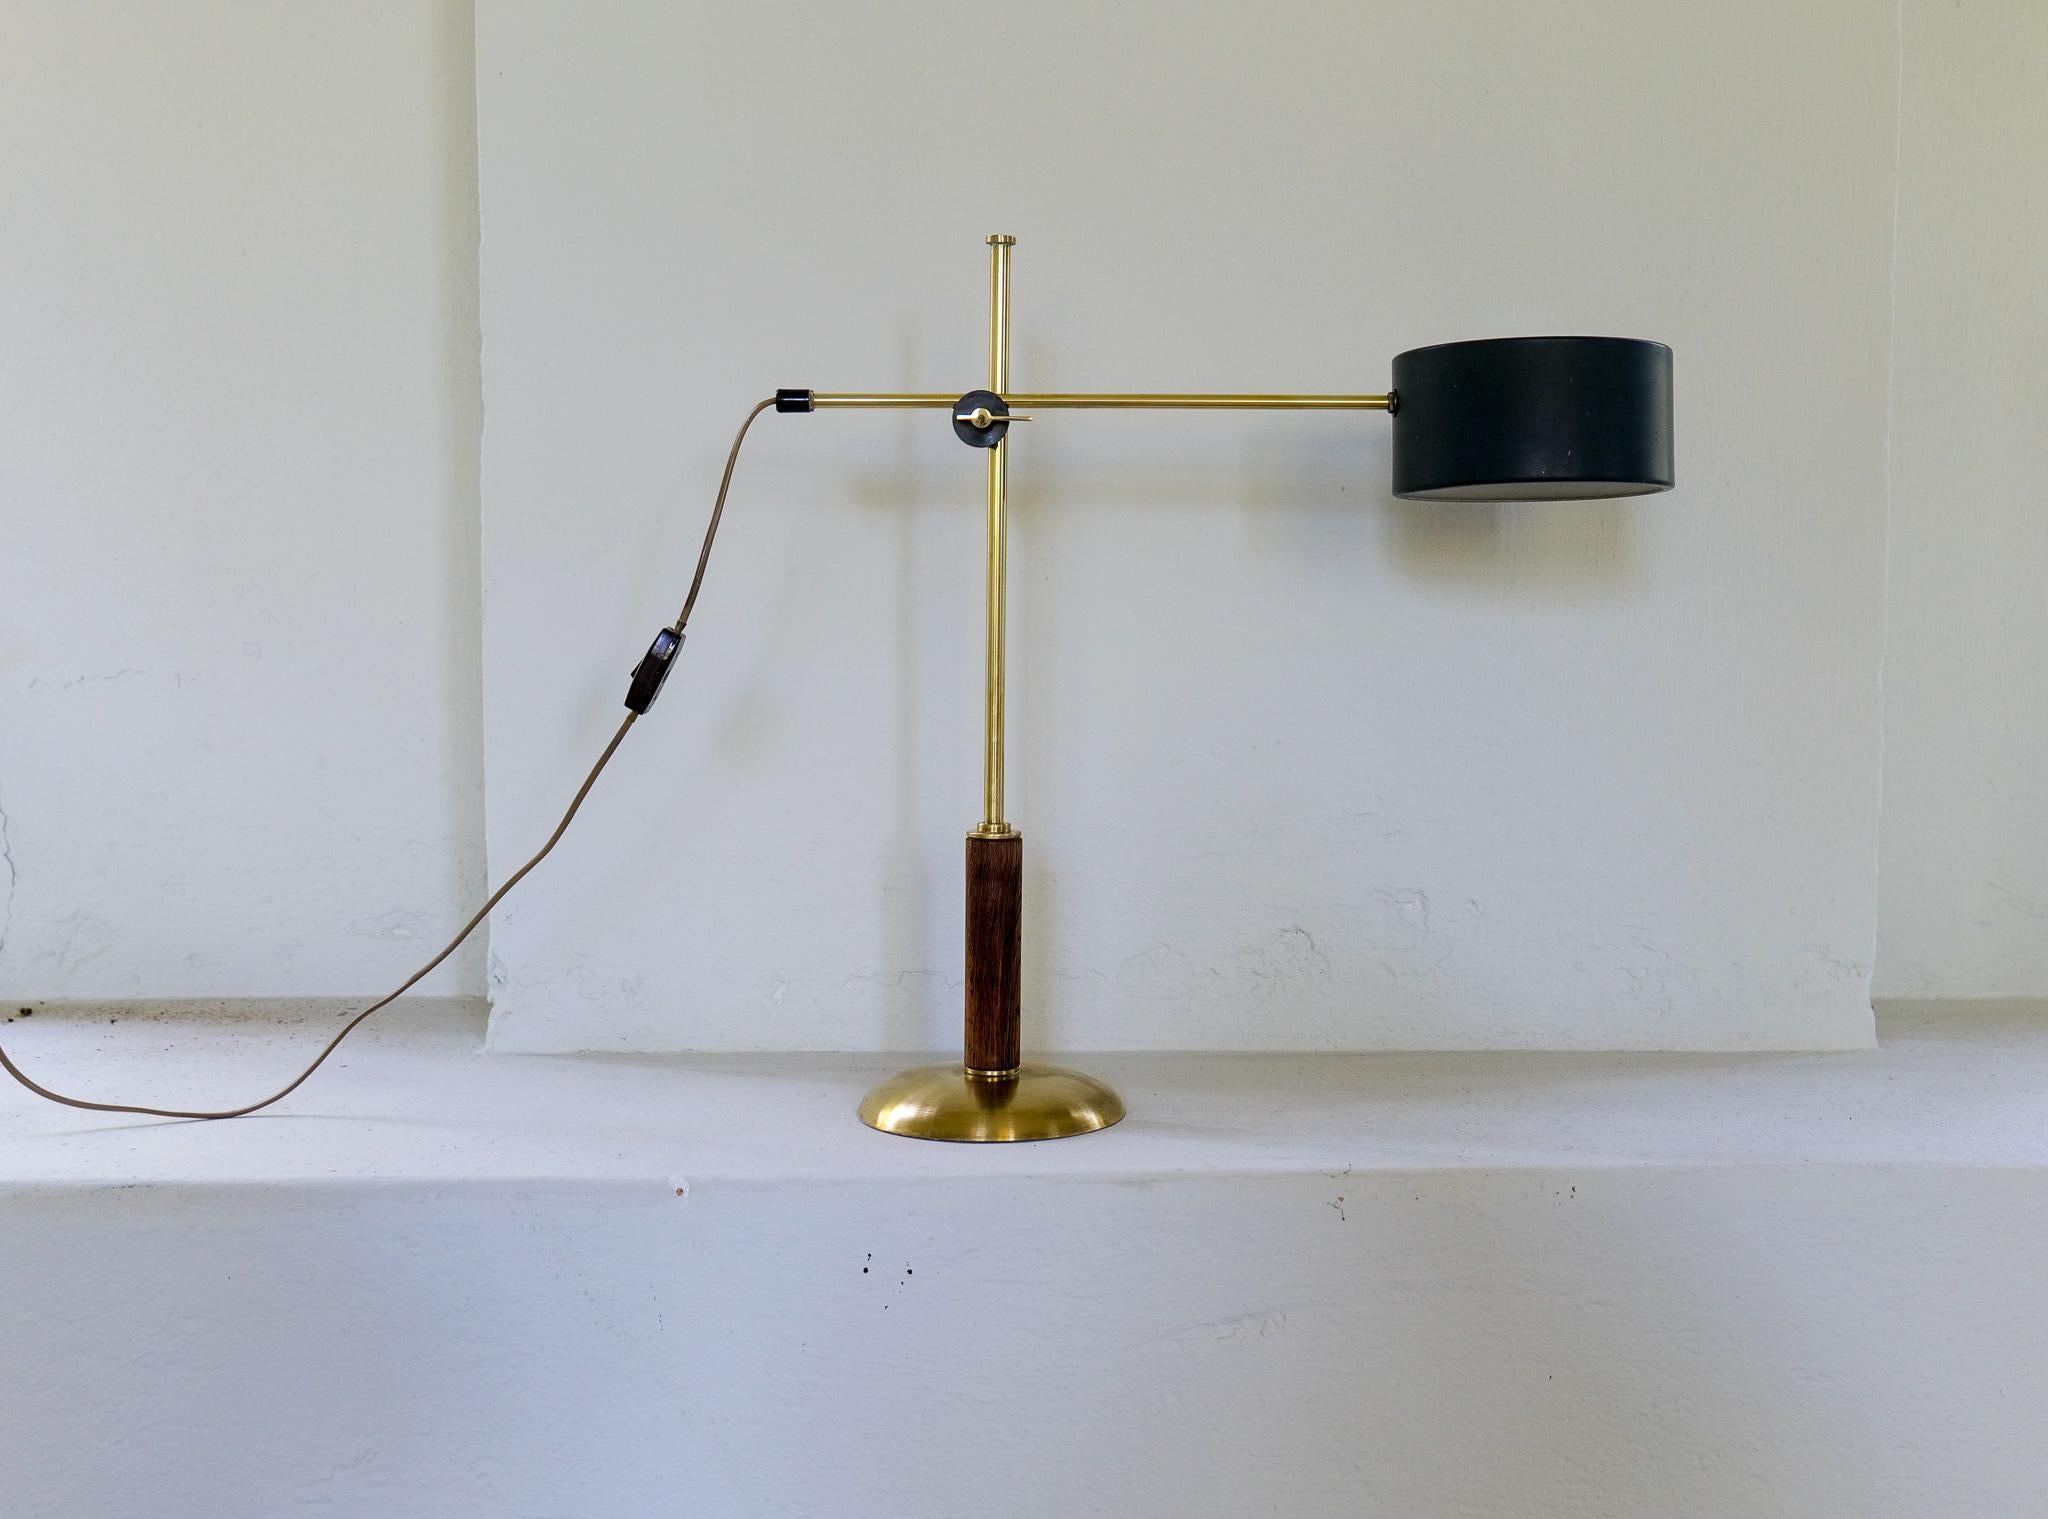 This rare table lamp produced in Sweden and designed by Einar Bäckström is adjustable in both height and angles. 
Brass base with walnut rod and a lacquered shade with brass details. 

Good vintage condition with some wear to the shade.